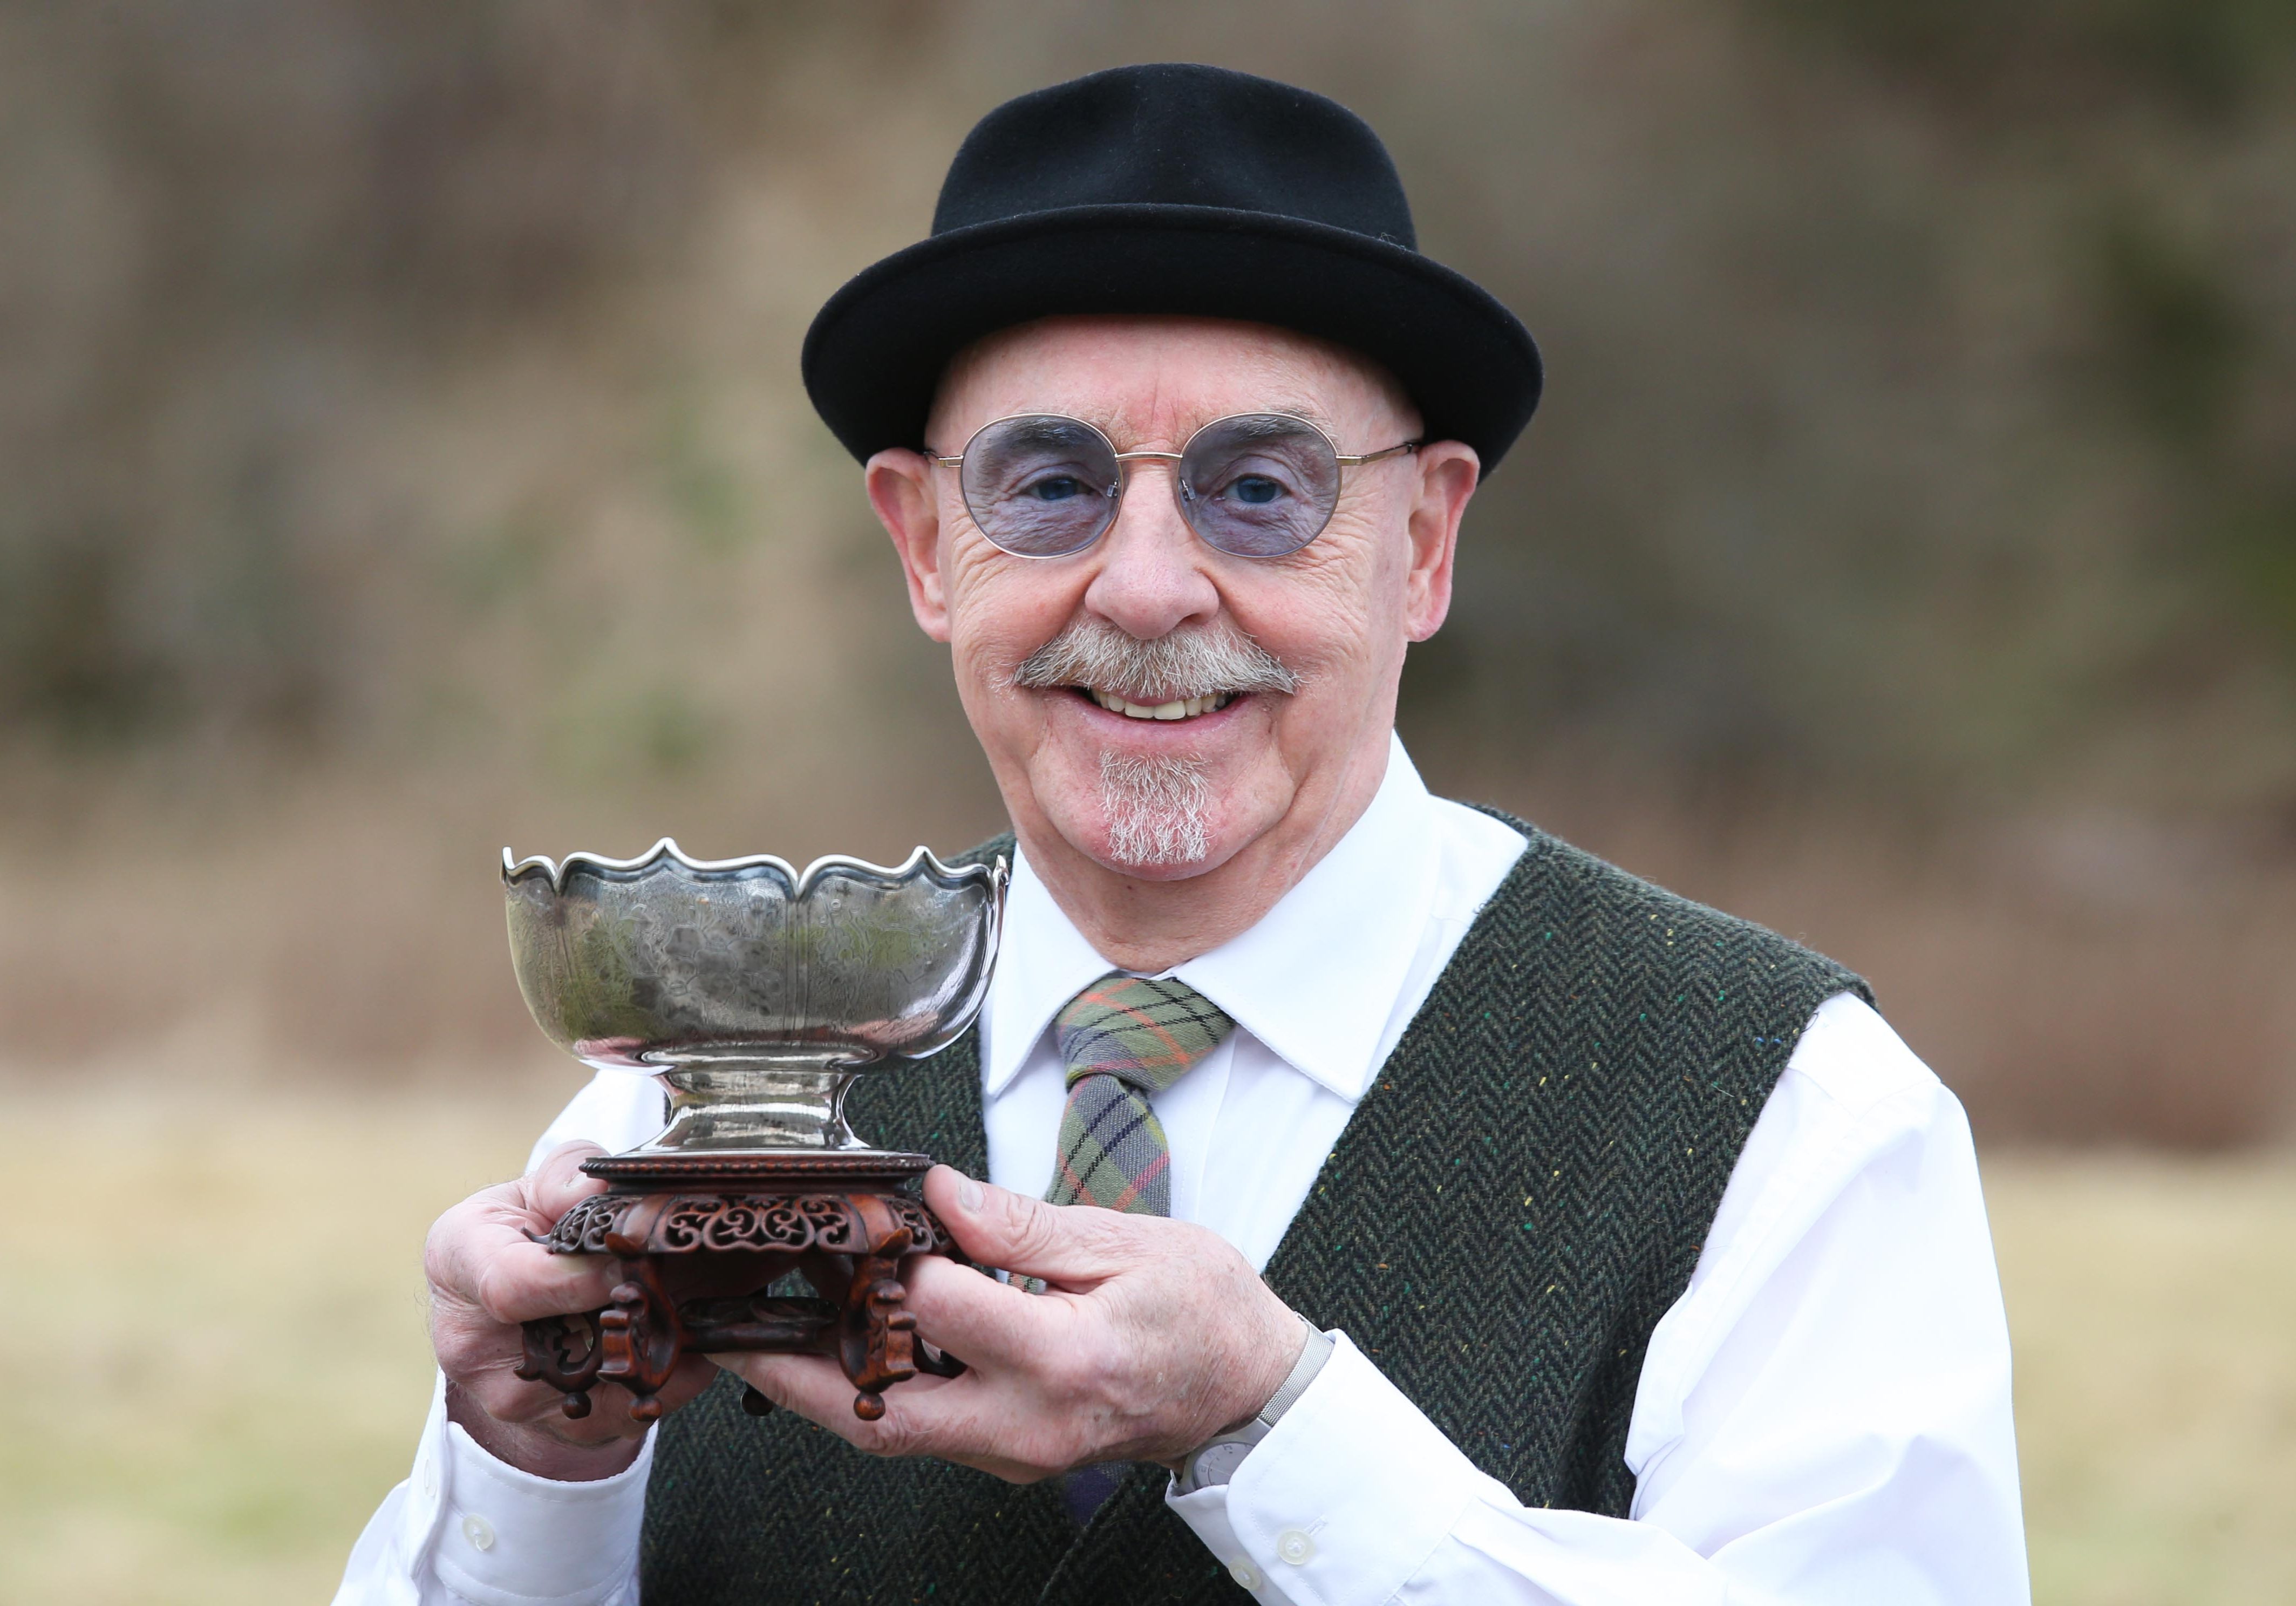 Adrian Taylor with the Cabrach Picnic and Games Rose Bowl. All pictures credit Peter Jolly.